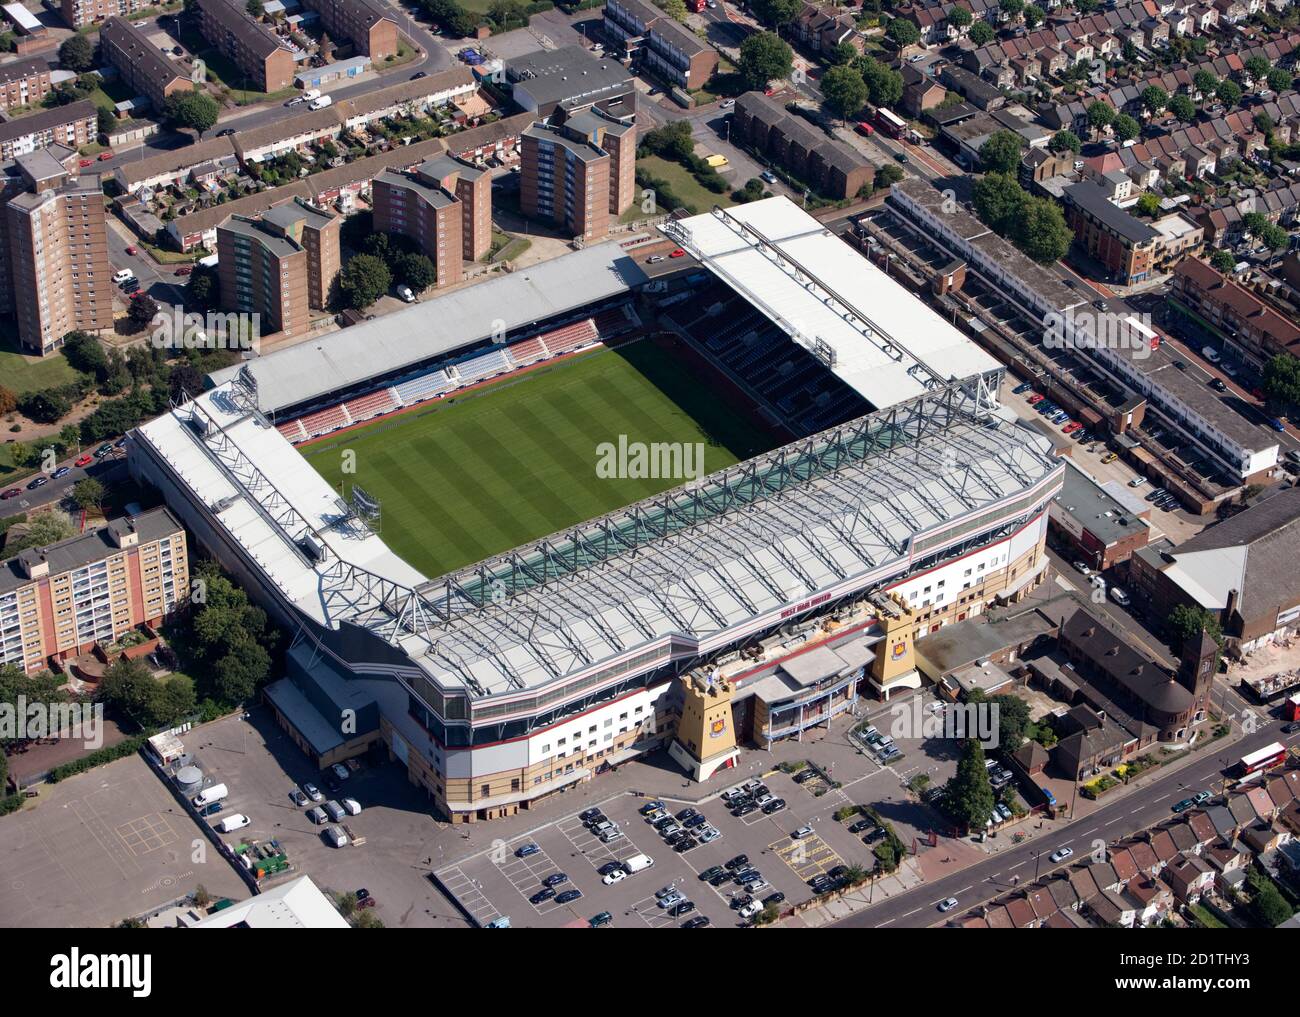 UPTON PARK, London. Aerial view of Boleyn Ground, the home of West Ham United FC since 1904. Photographed in 2009. Stock Photo